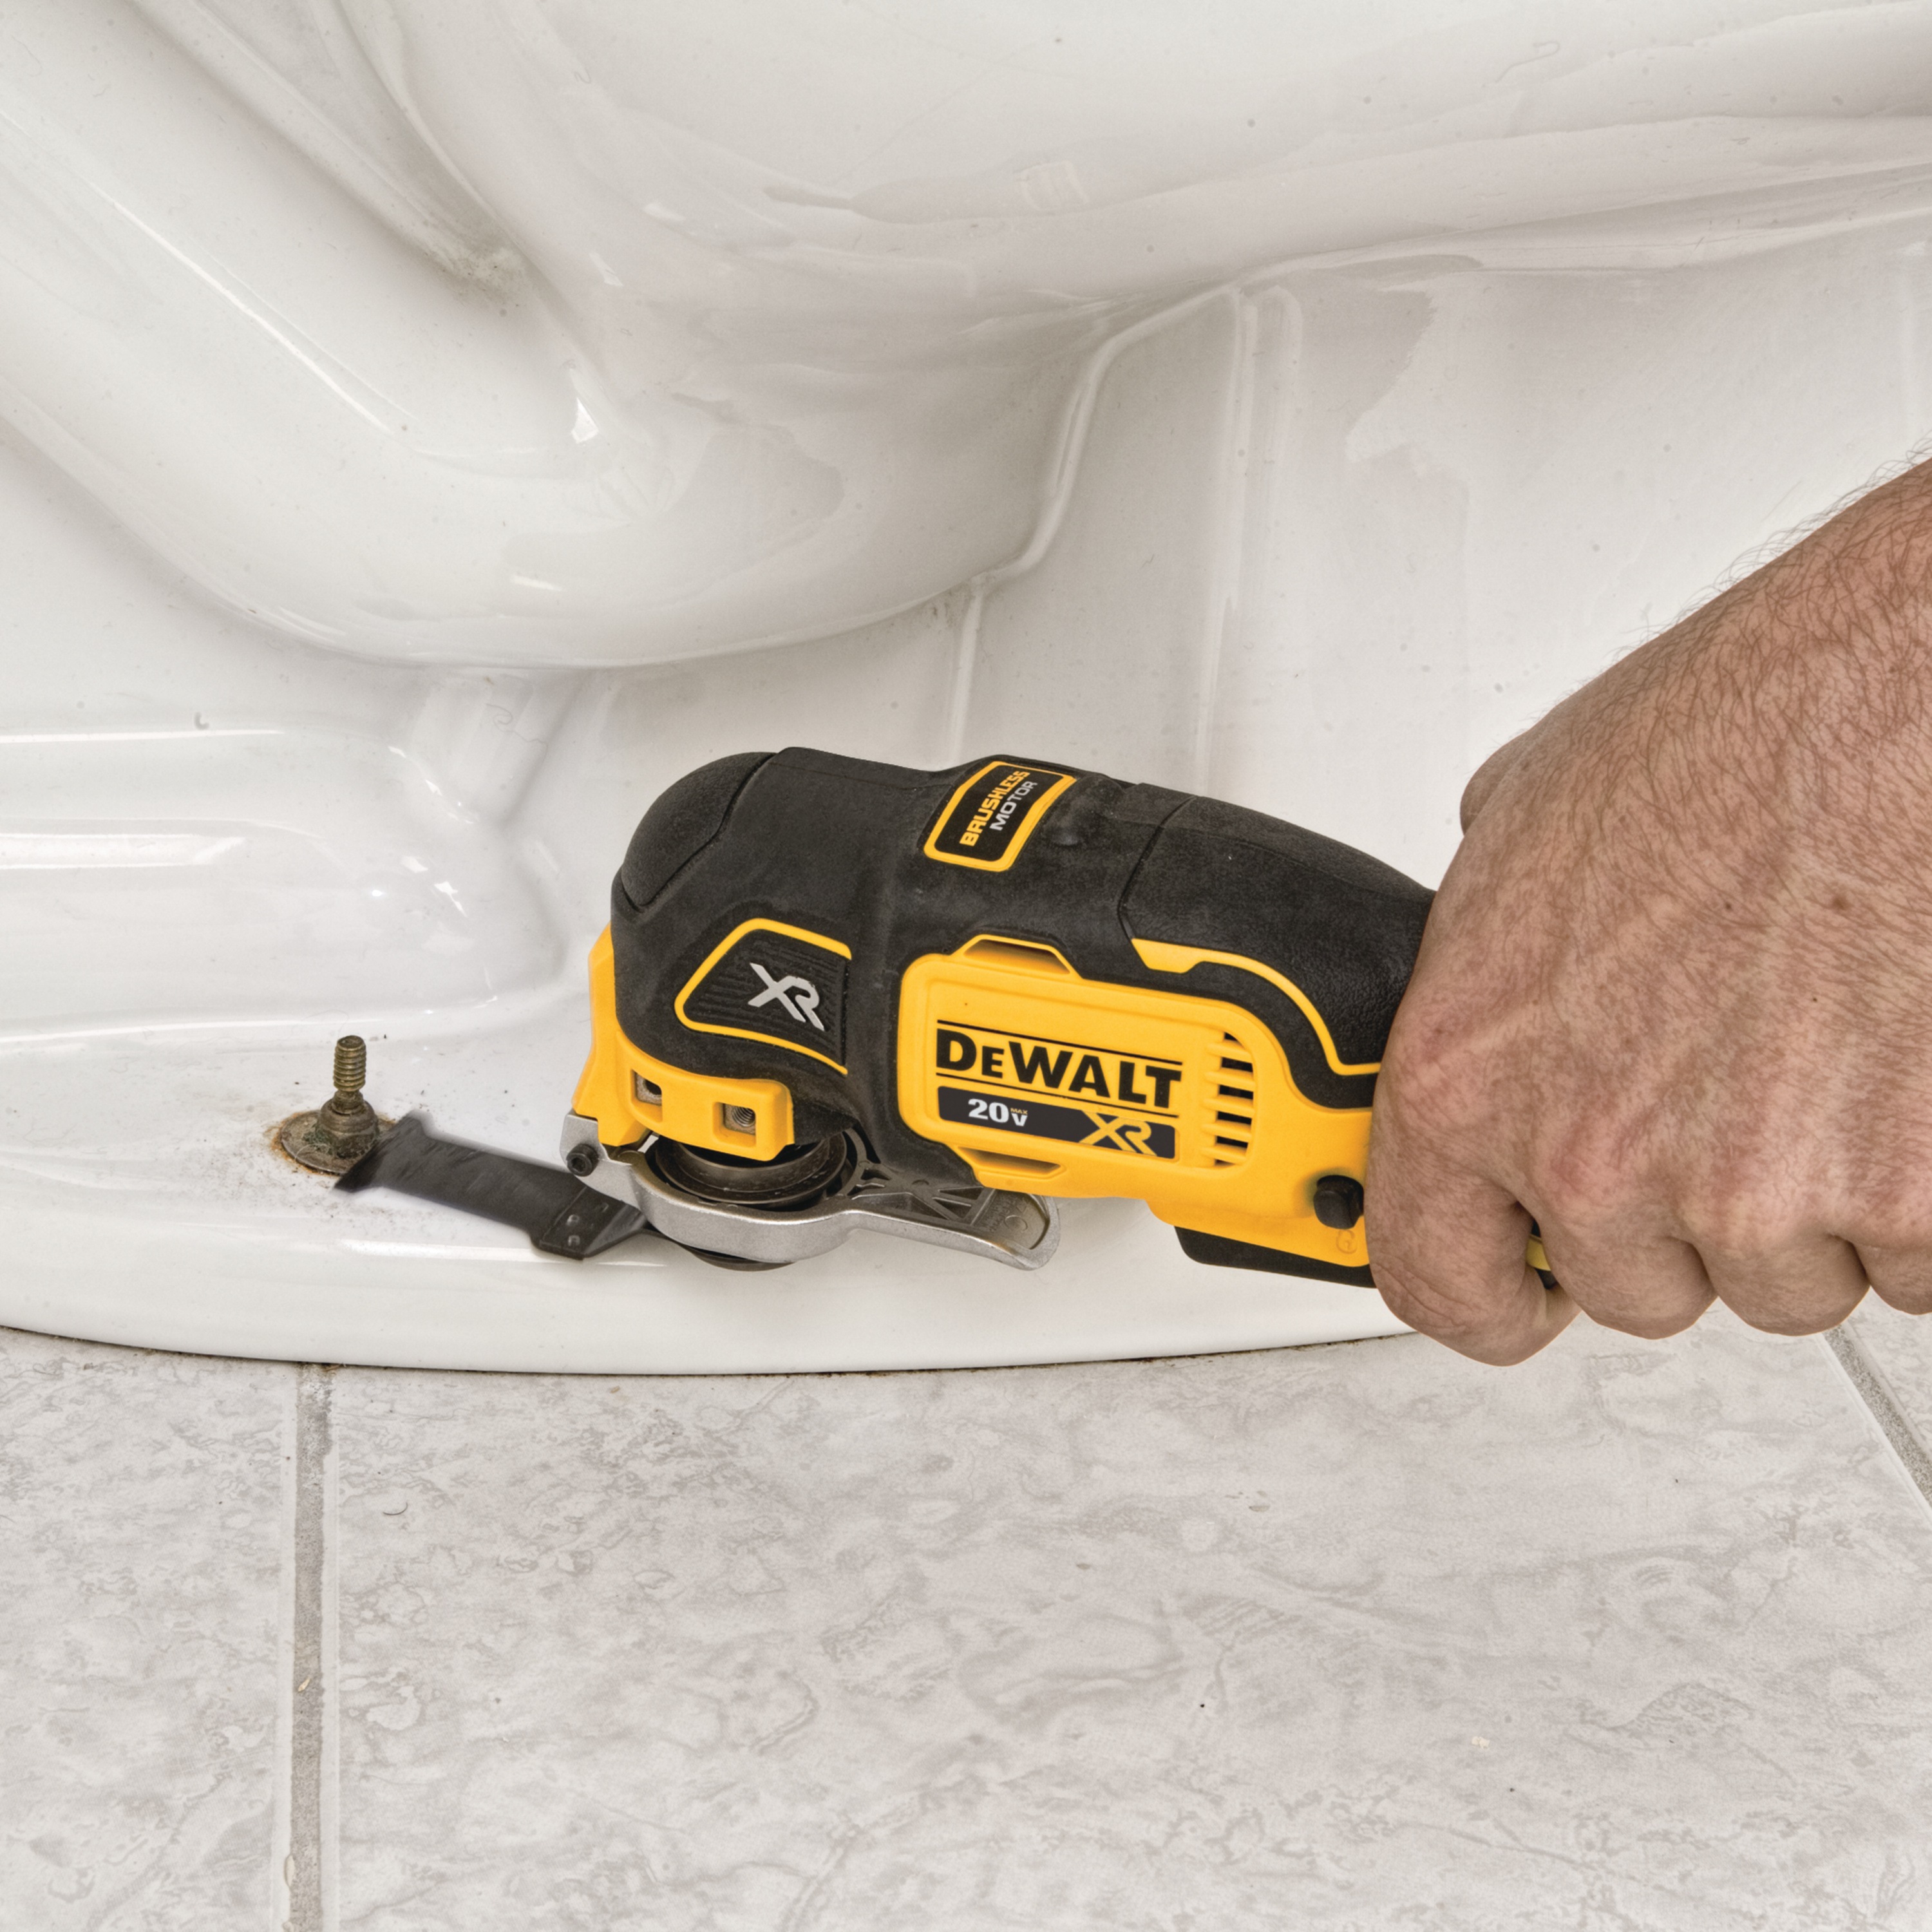 XR Cordless Oscillating Multi Tool being used to cut hardened bolt from a toilet base